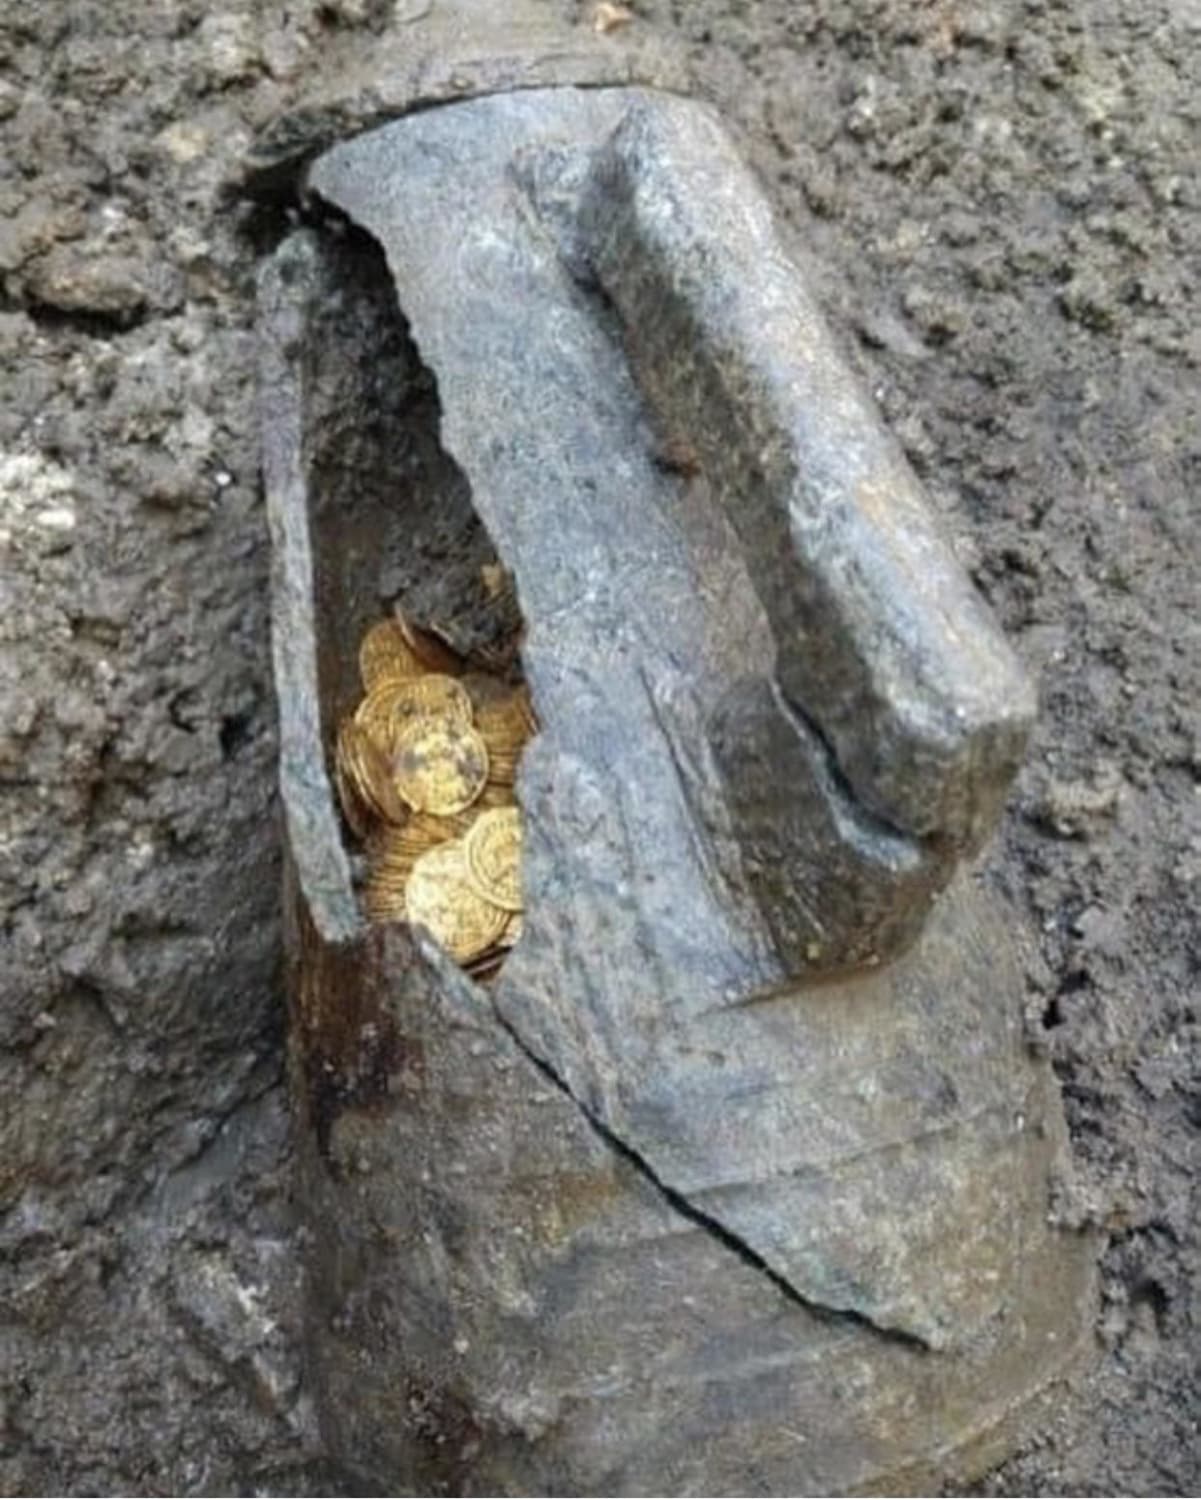 An ancient Roman jug dating back to the 5th century AD found under an abandoned theater near Milan, Italy.